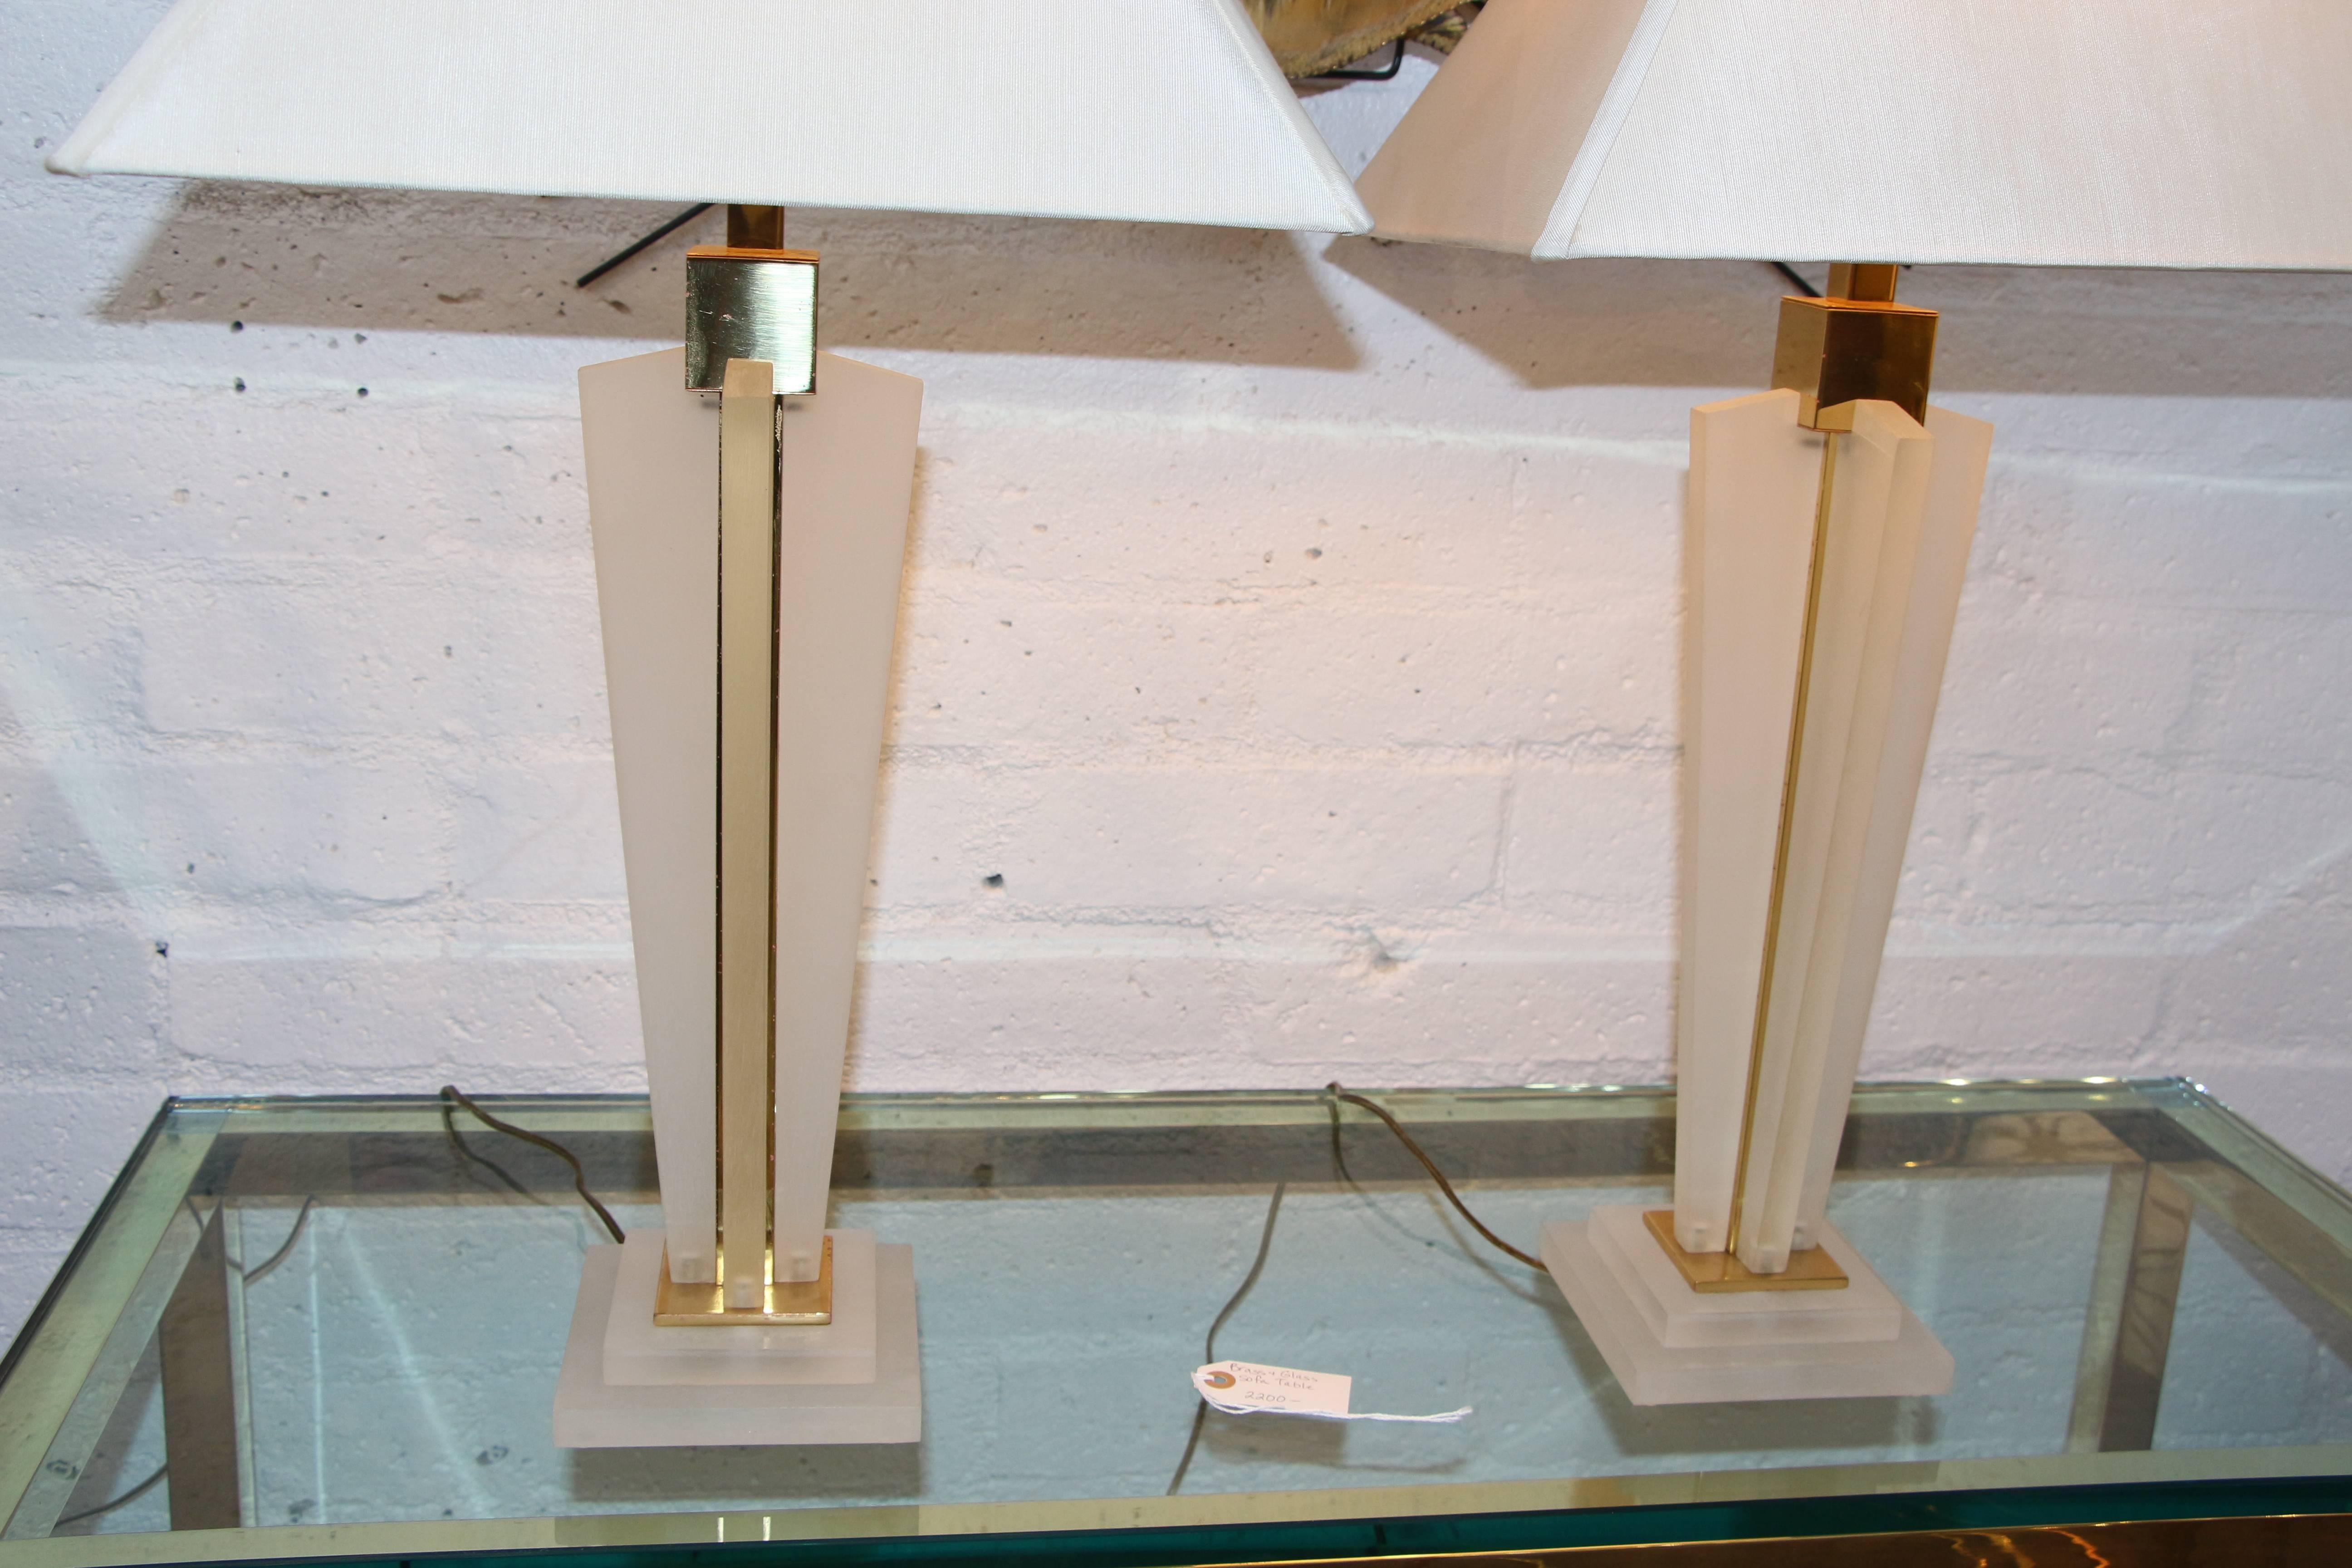 A nice pair of frosted Lucite and brass lamps by Frederick Cooper of Chicago.
These lamps come with the shades pictured. They are in working order. In good age appropriate condition, with some minor marks and imperfections.